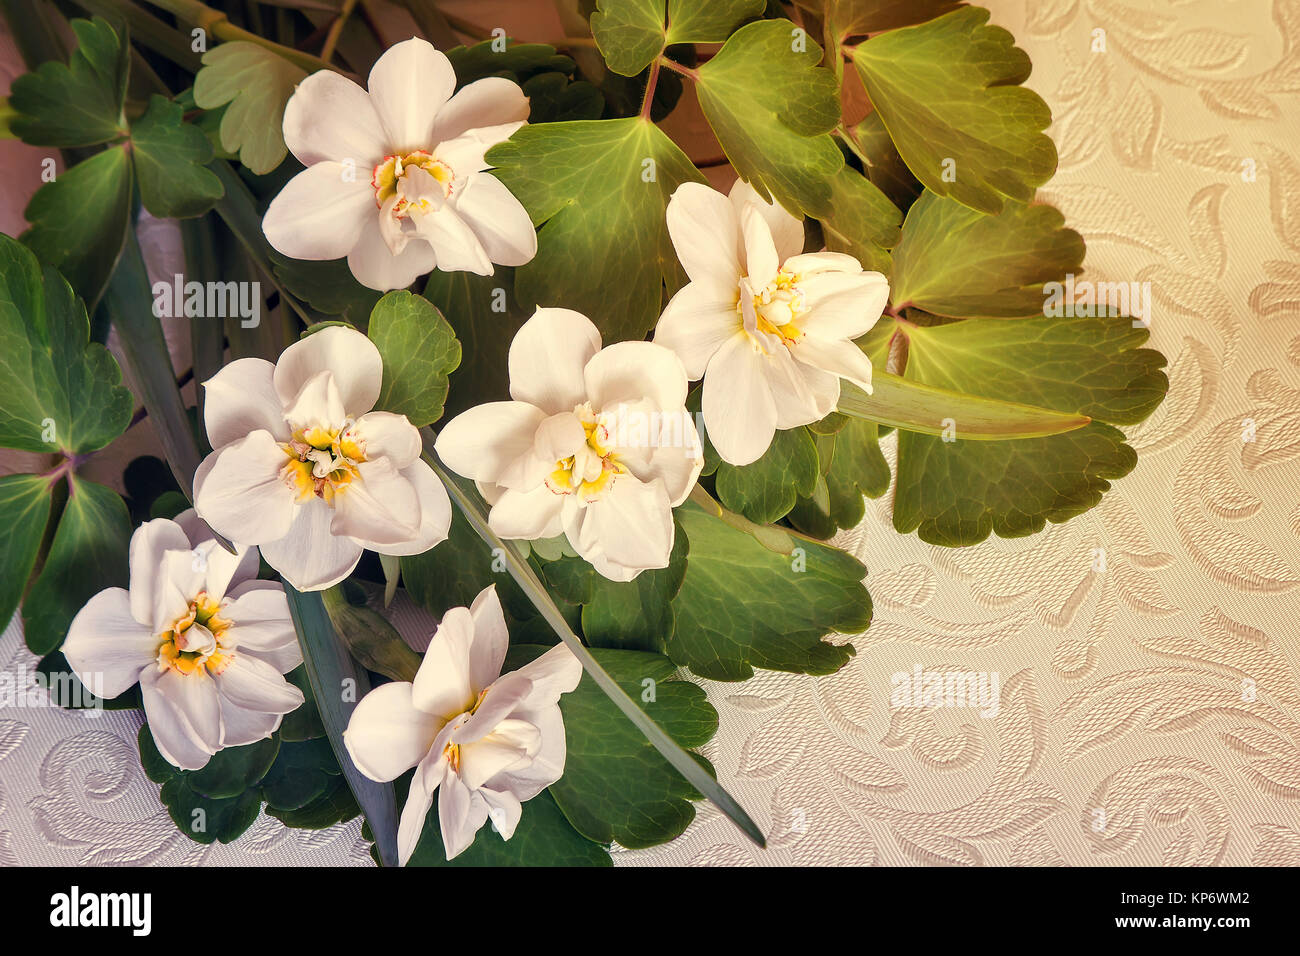 A bouquet of white daffodils among green leaves. Stock Photo